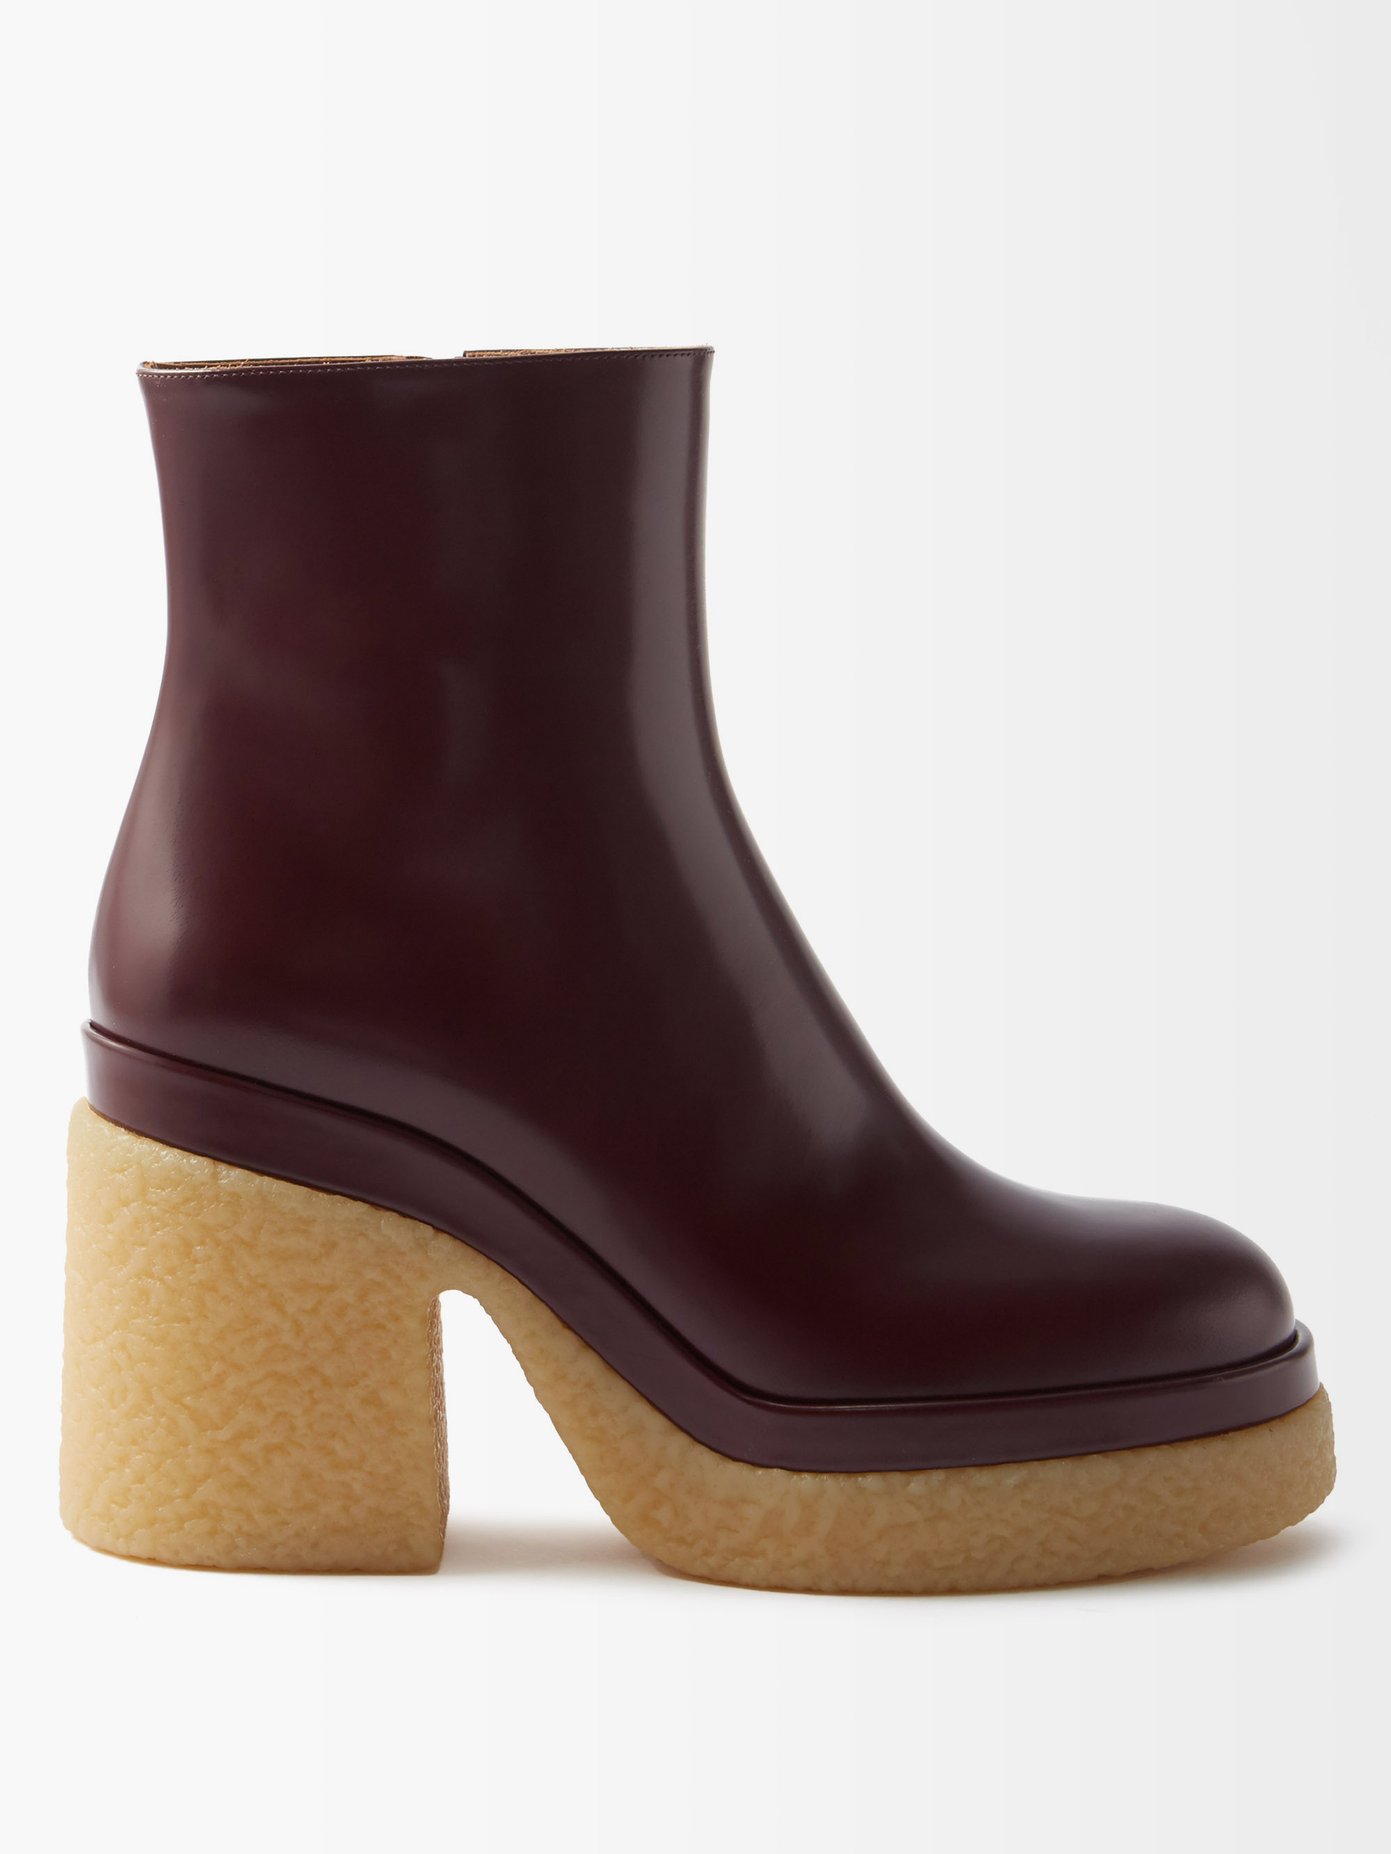 22SS 끌로에 앵클 부츠 Chloe Burgundy Kurtys leather ankle boots